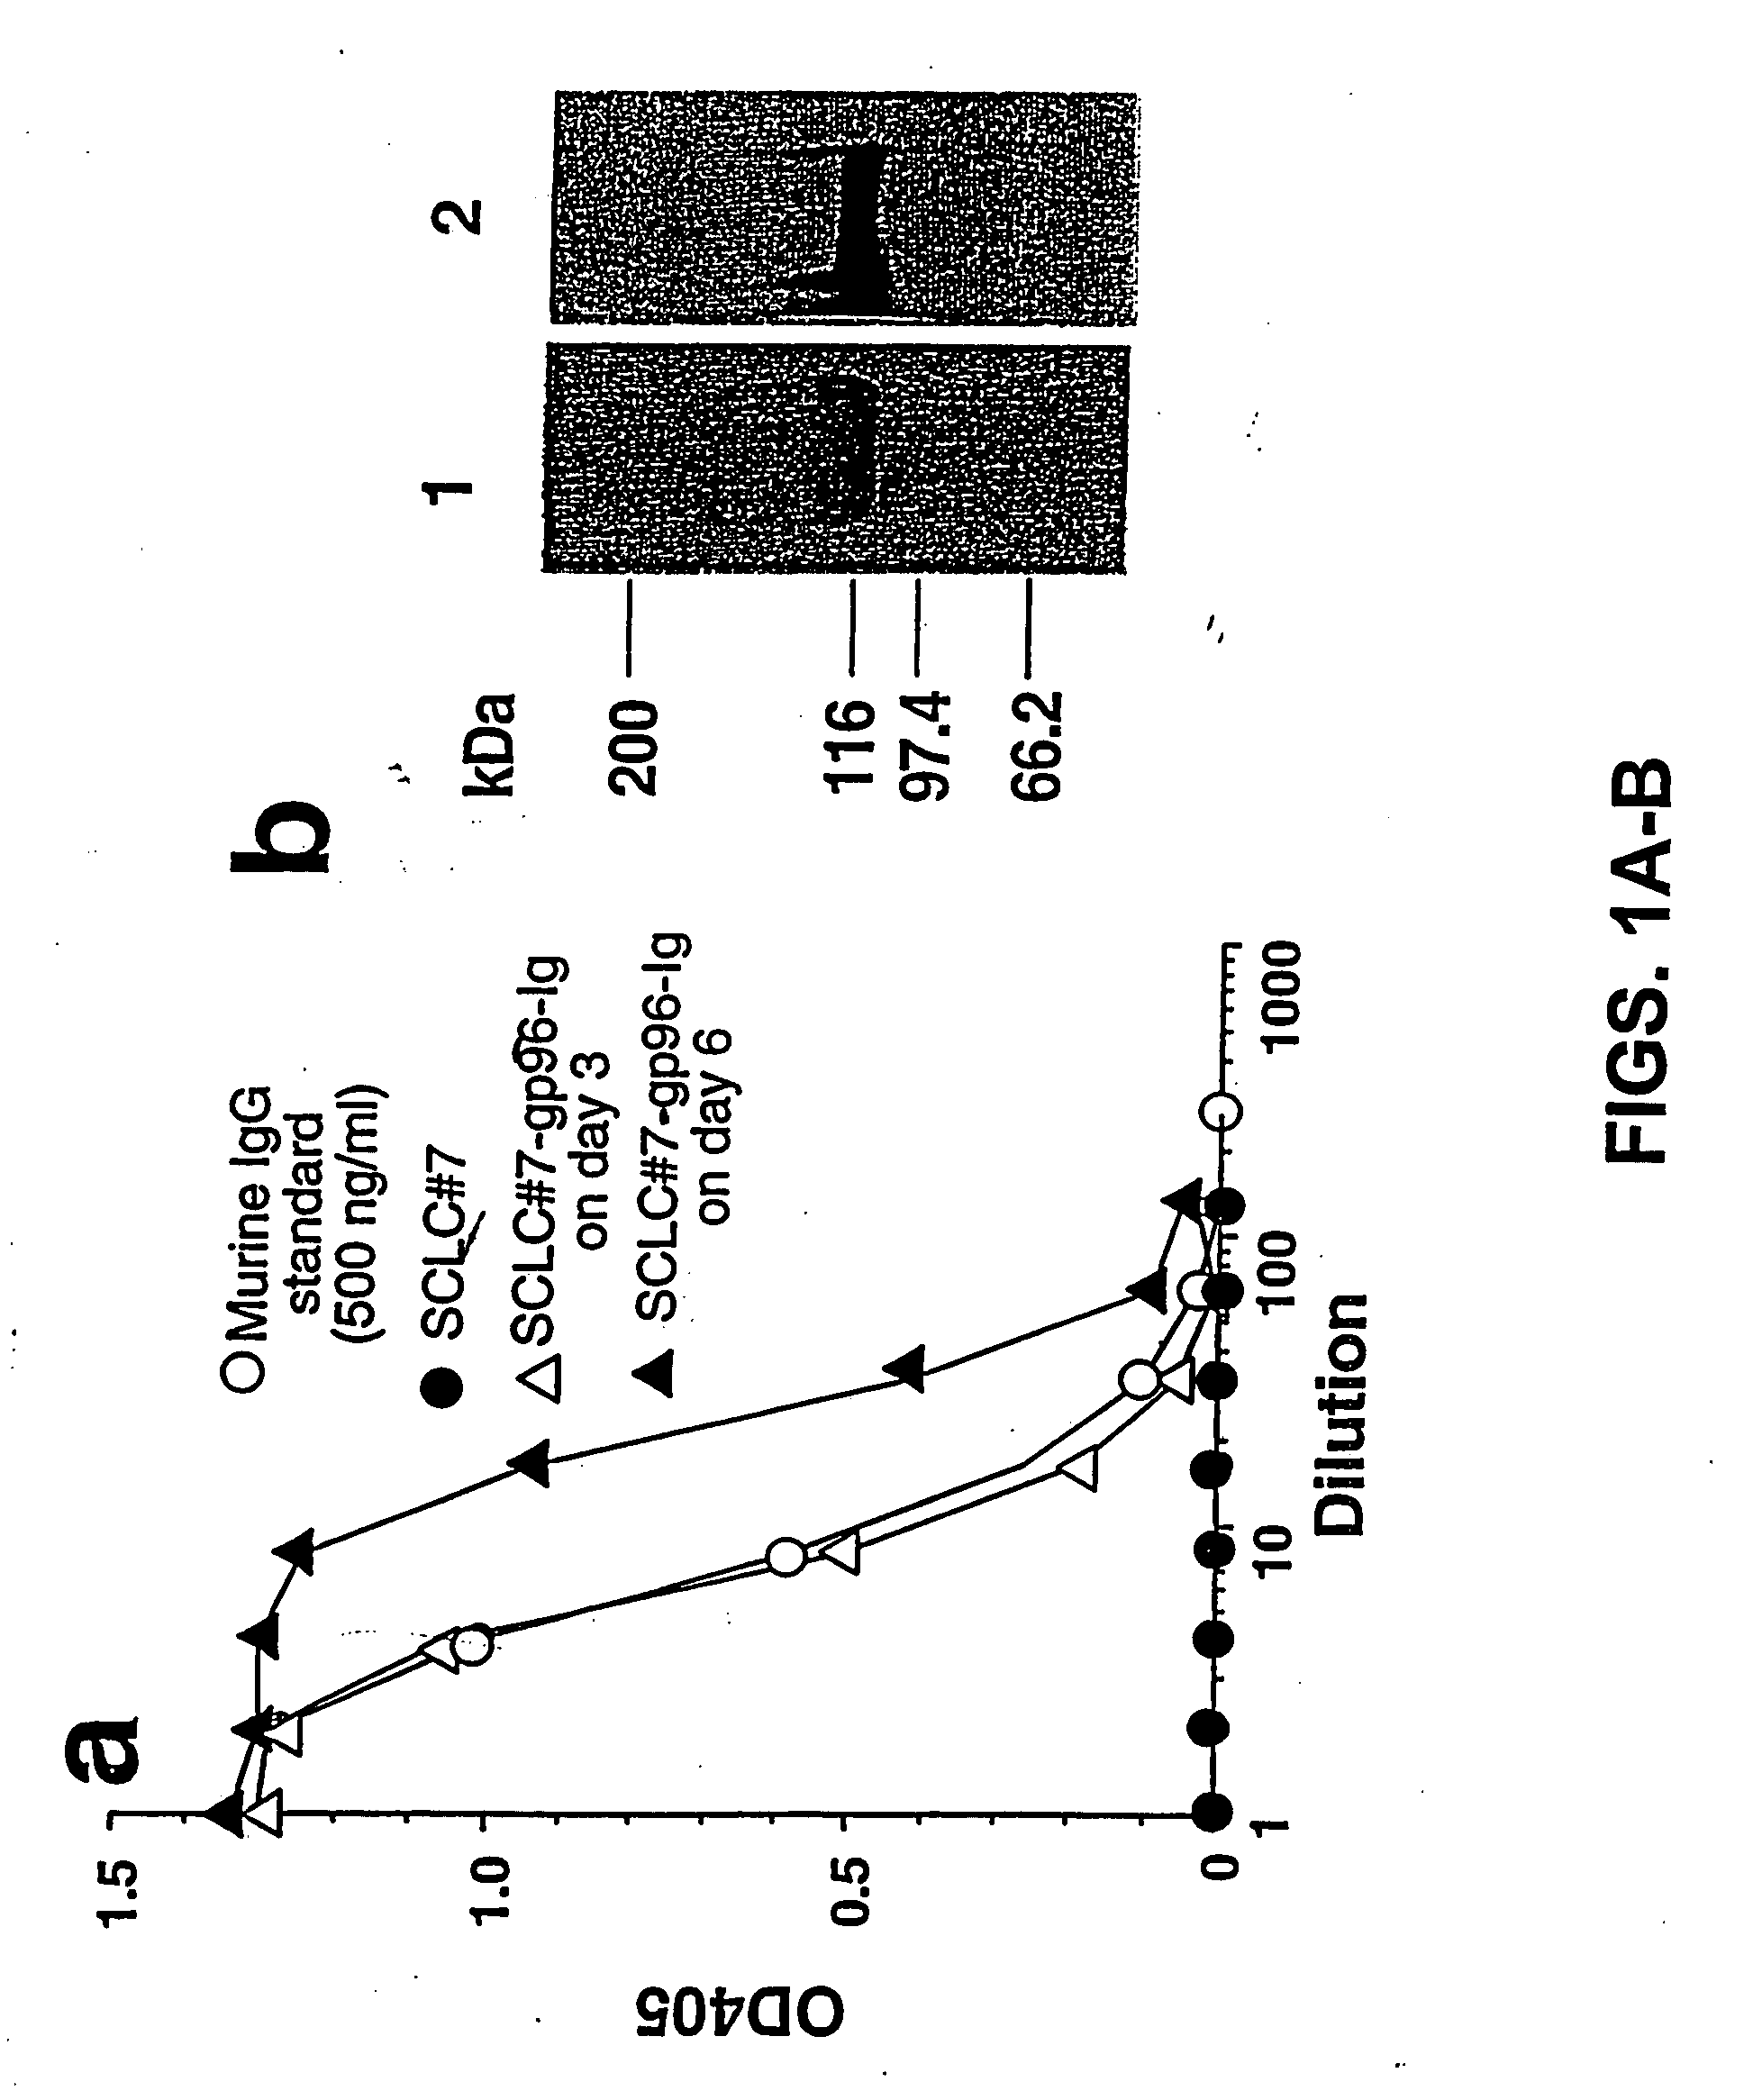 Recombinant cancer cell secreting modified heat shock protein-antigenic peptide complex